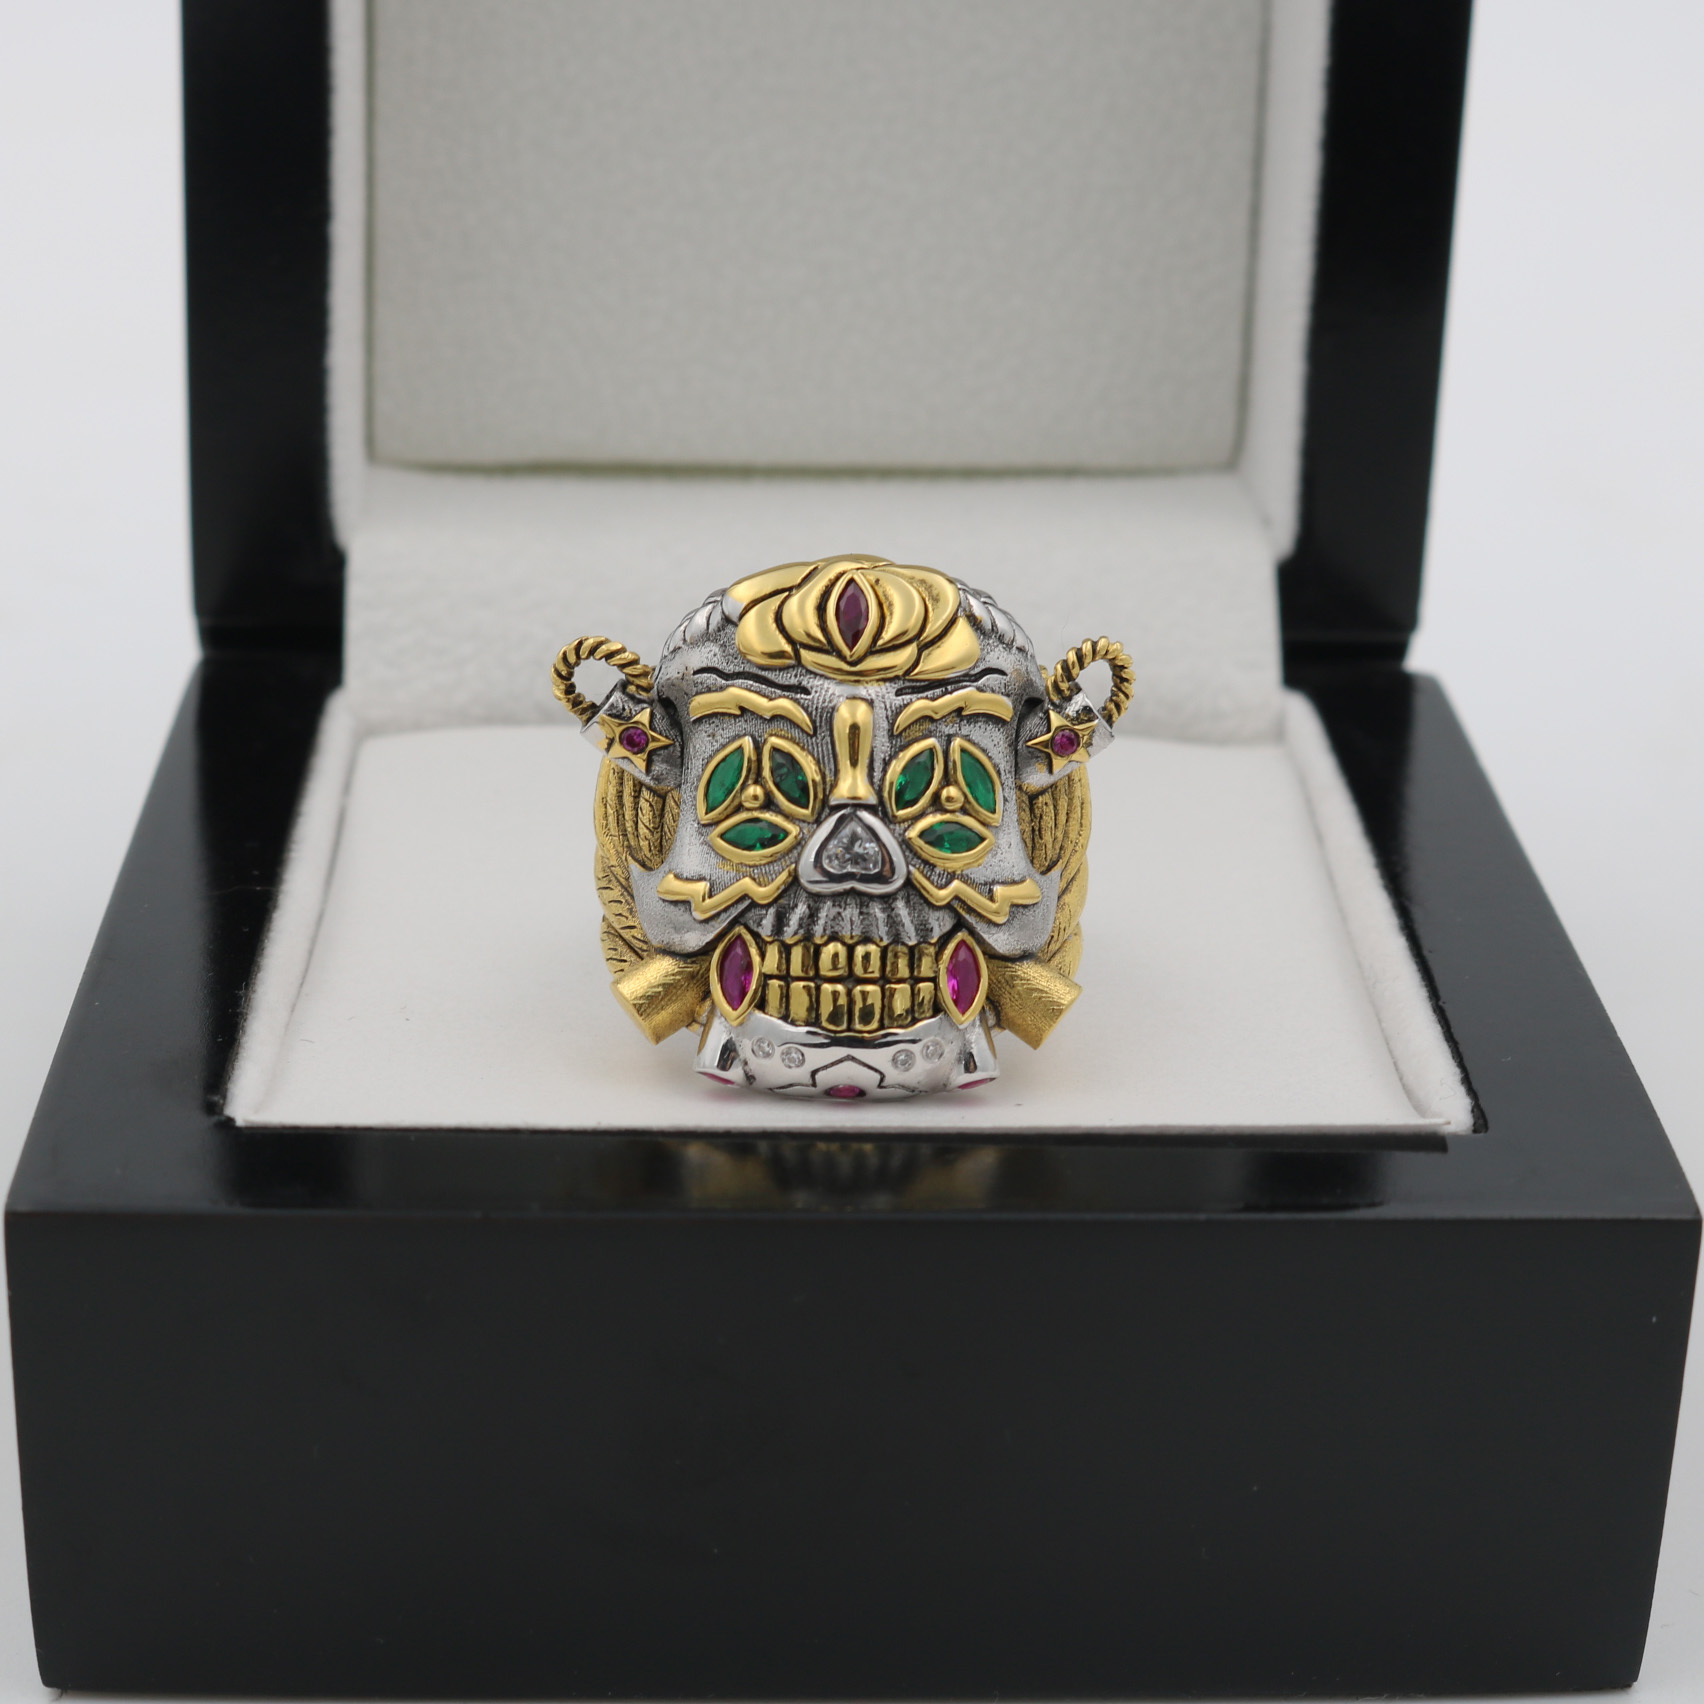 The Expendables Ring Worn By Sylvester Stallone Rings Skull Ring ...